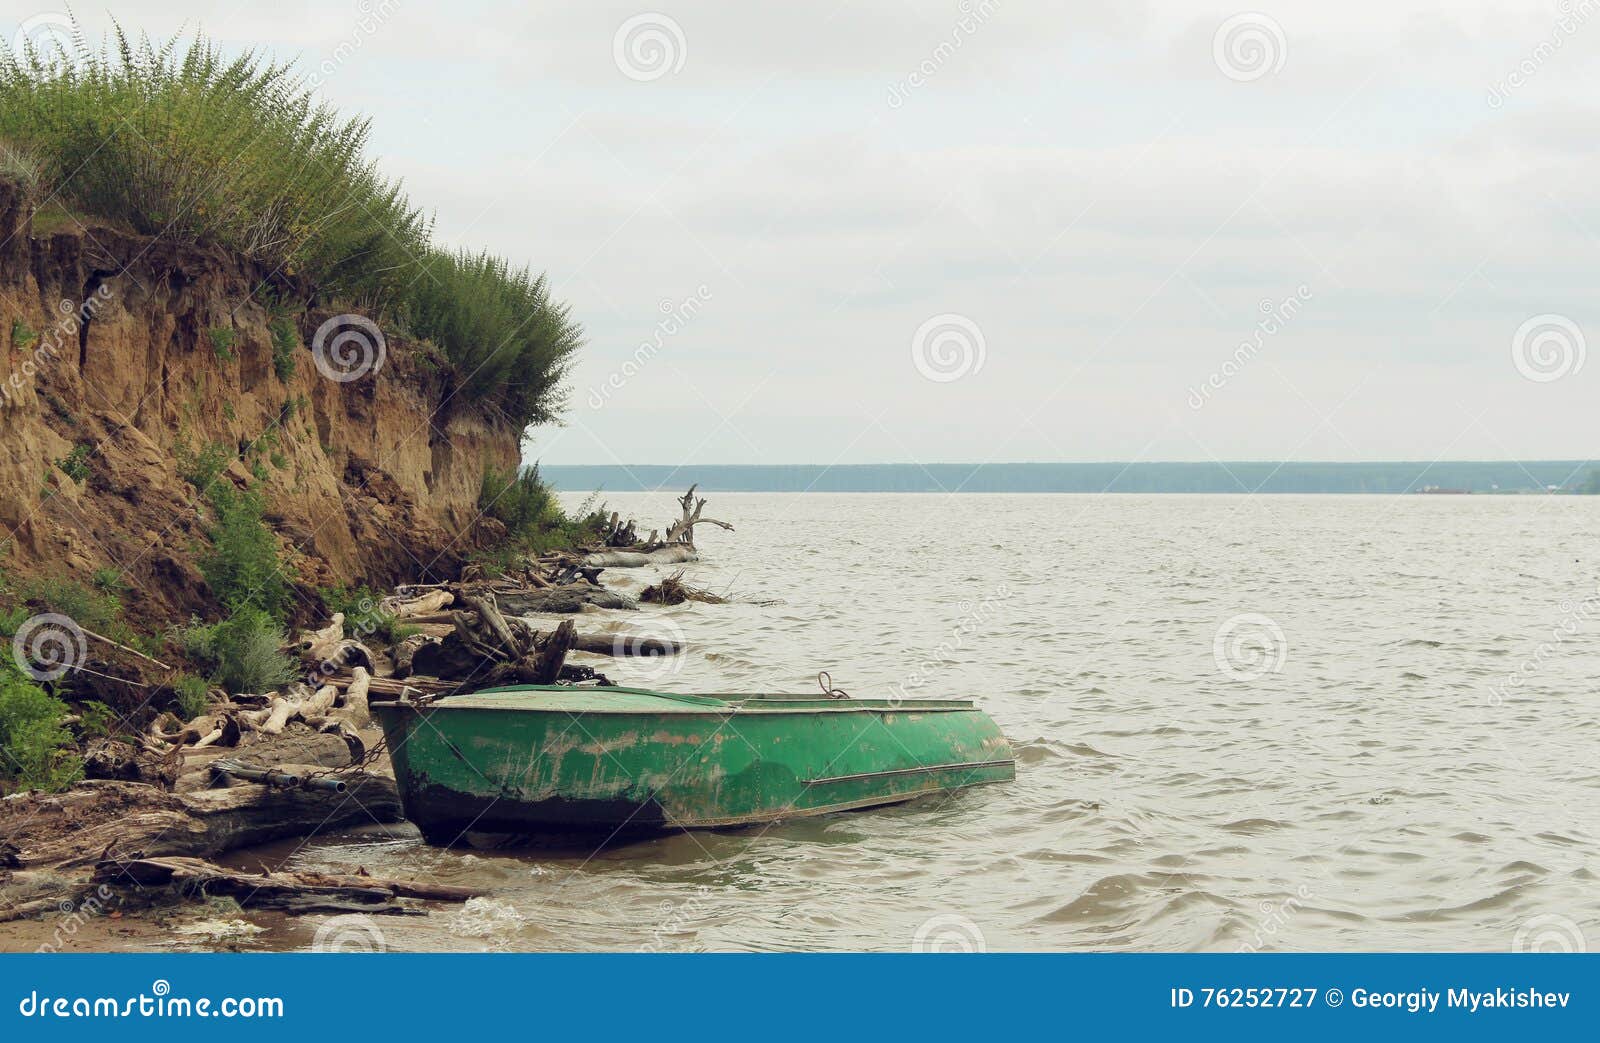 old green boat with oars stock image. image of abandoned